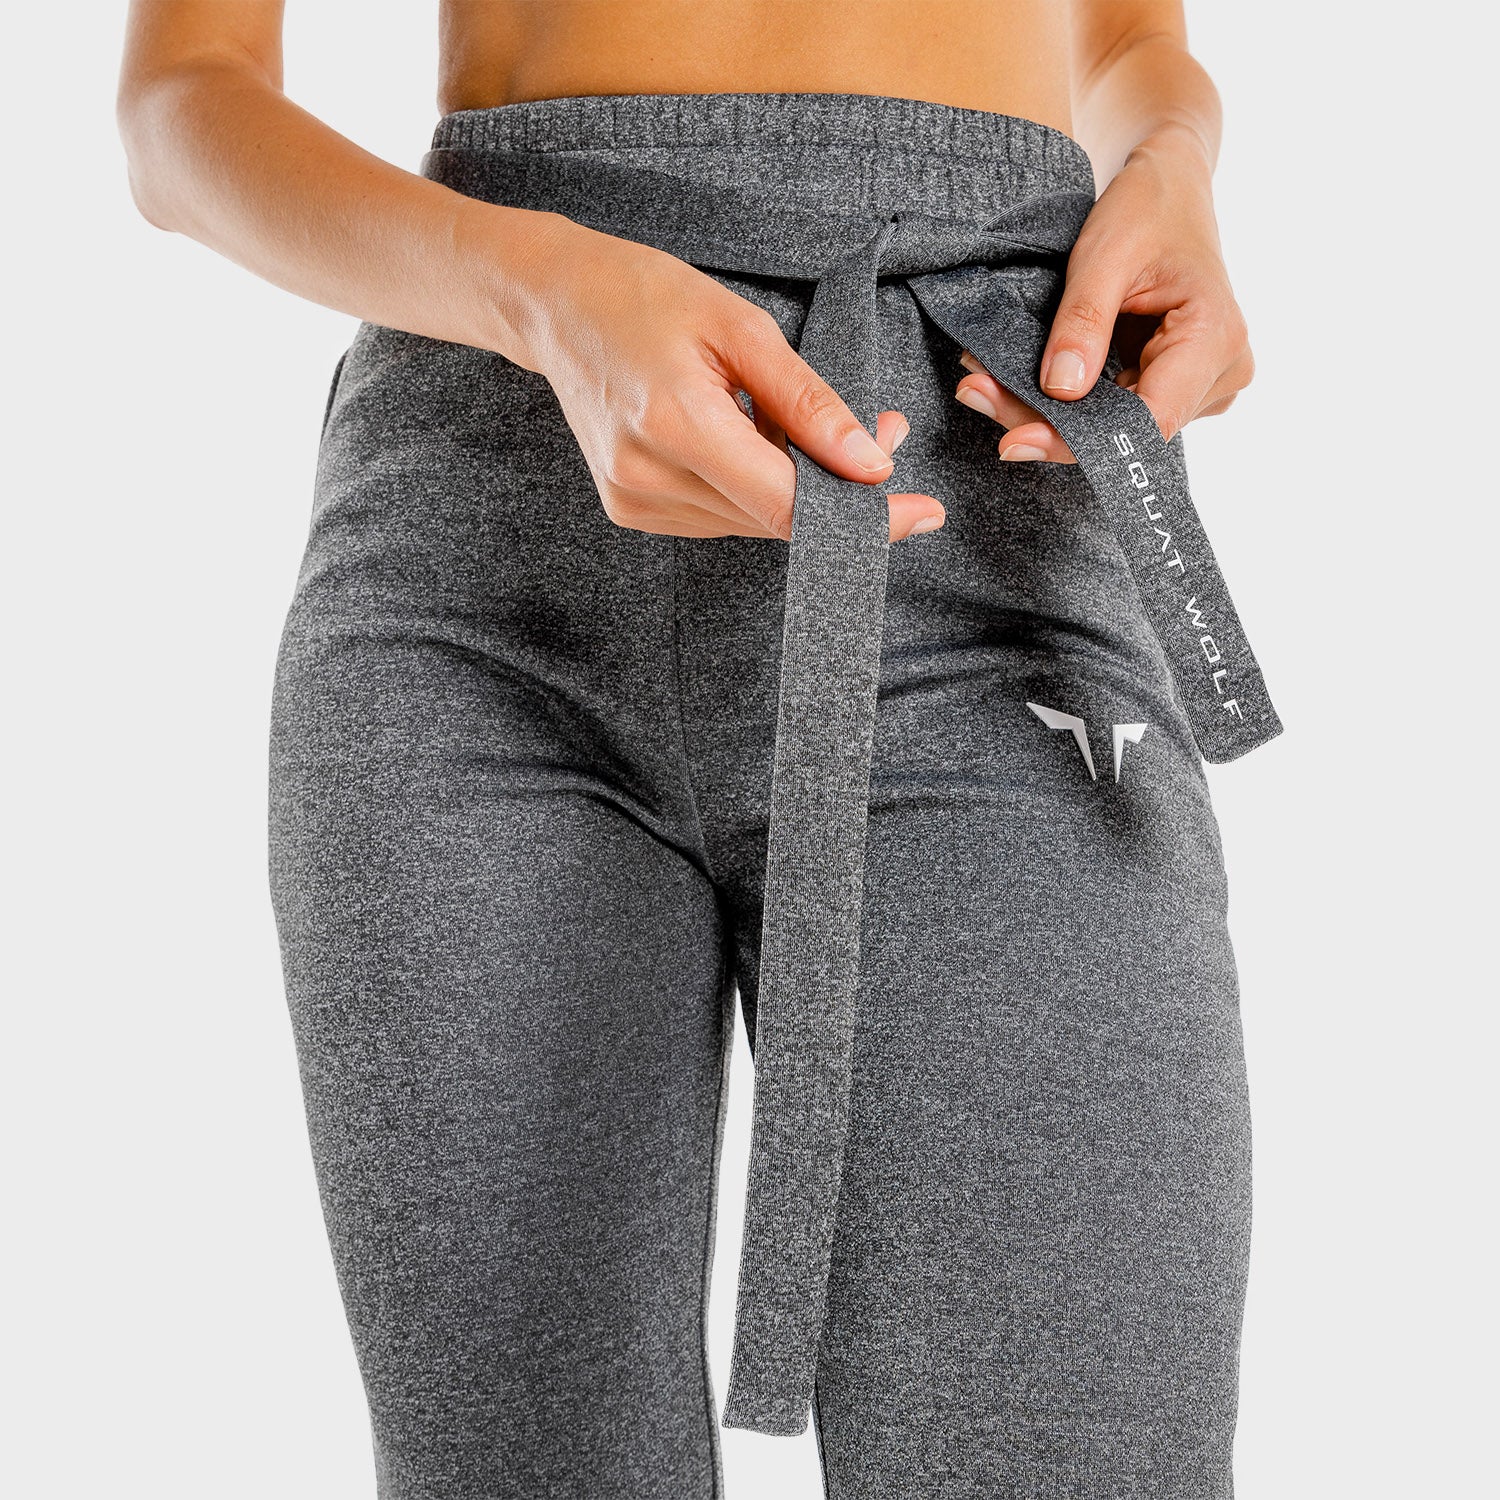 AE, She-Wolf Do-Knot-Joggers - Charcoal, Workout Pants Women